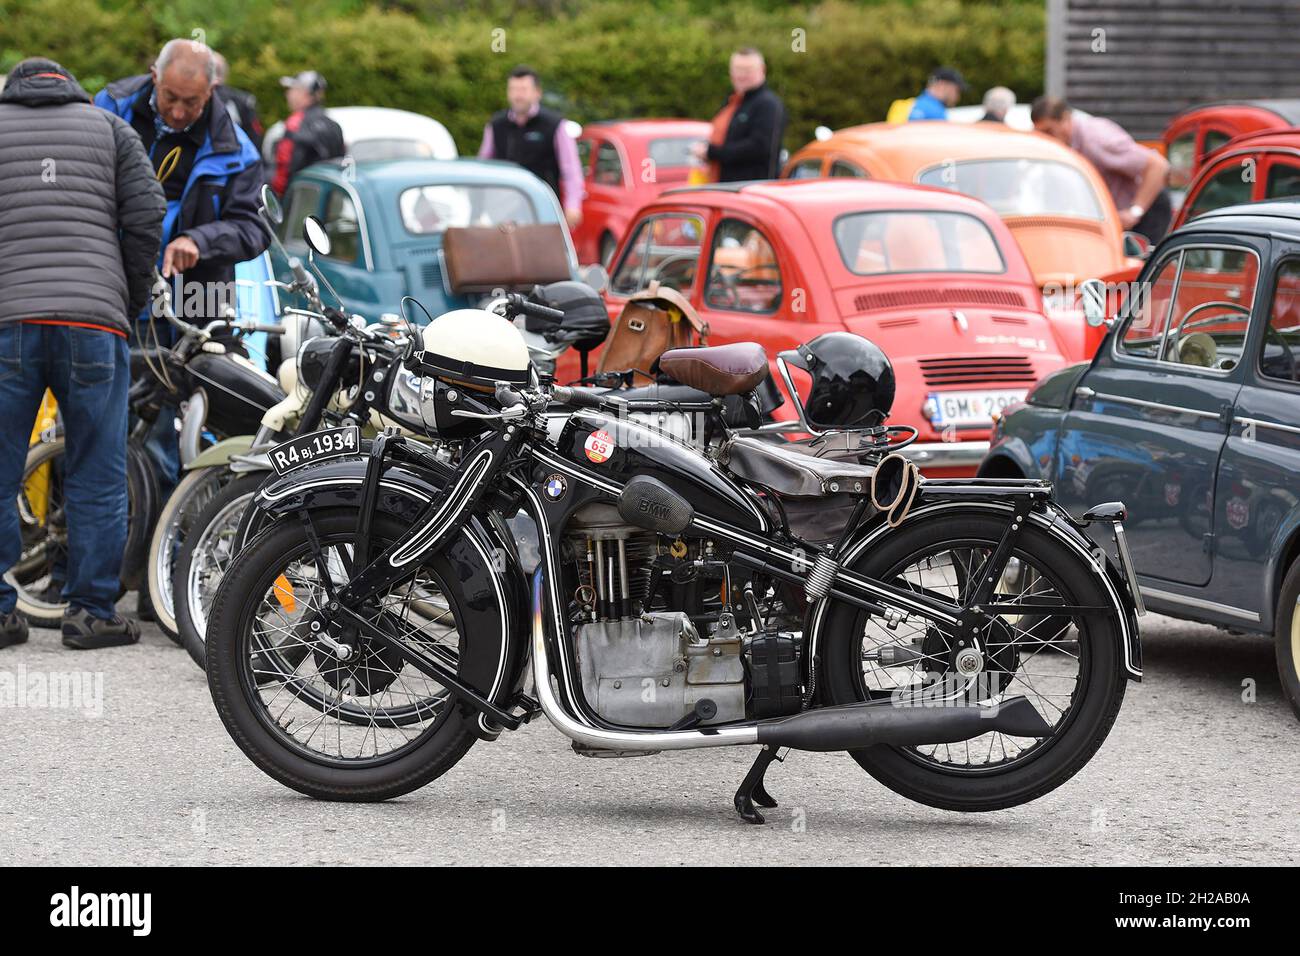 Bmw Motorcycle Oldtimer High Resolution Stock Photography and Images - Alamy